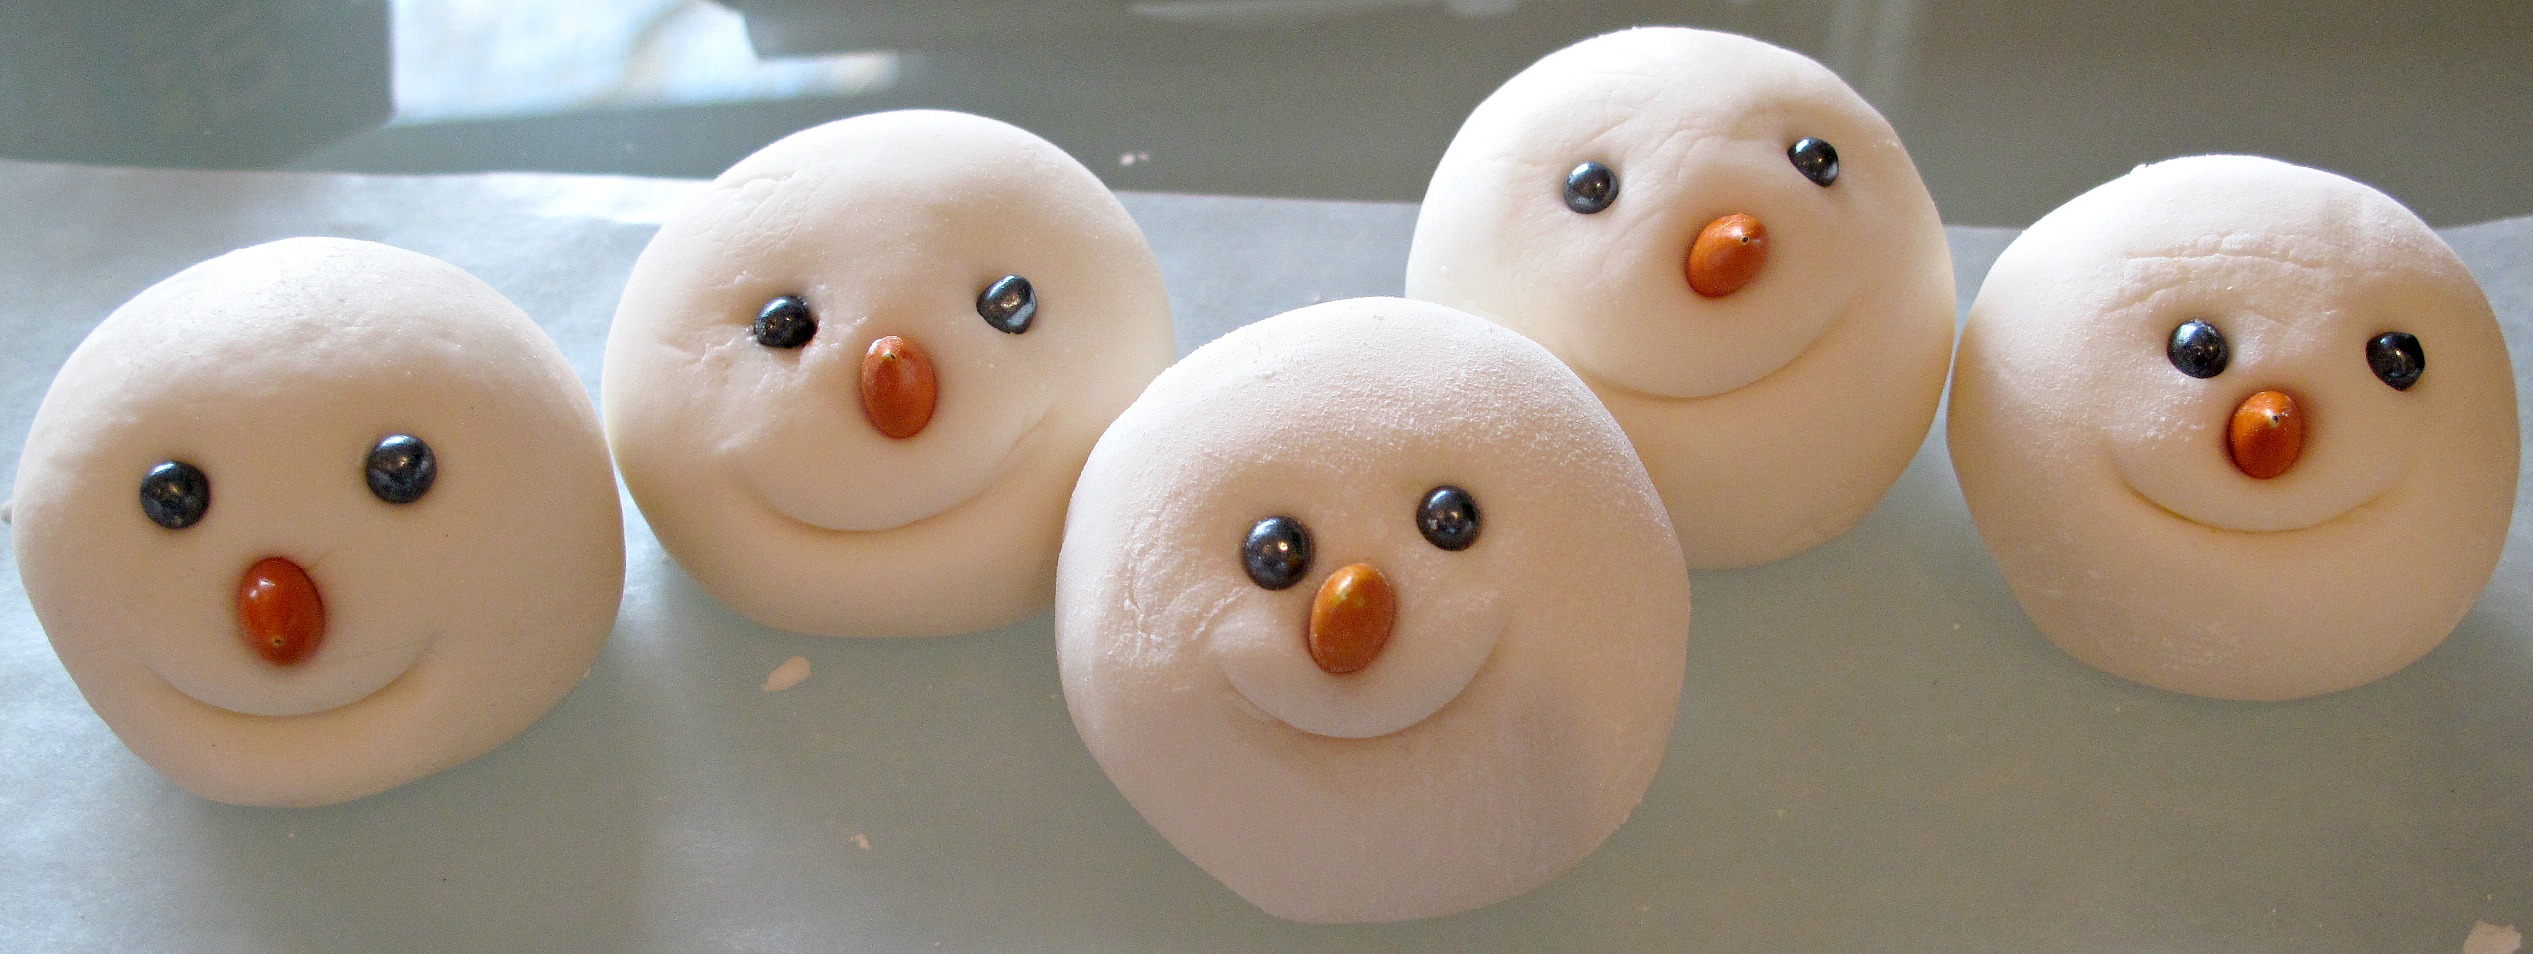 Closeup of 5 fondant heads with eyes, noses, and indented smile mouths.